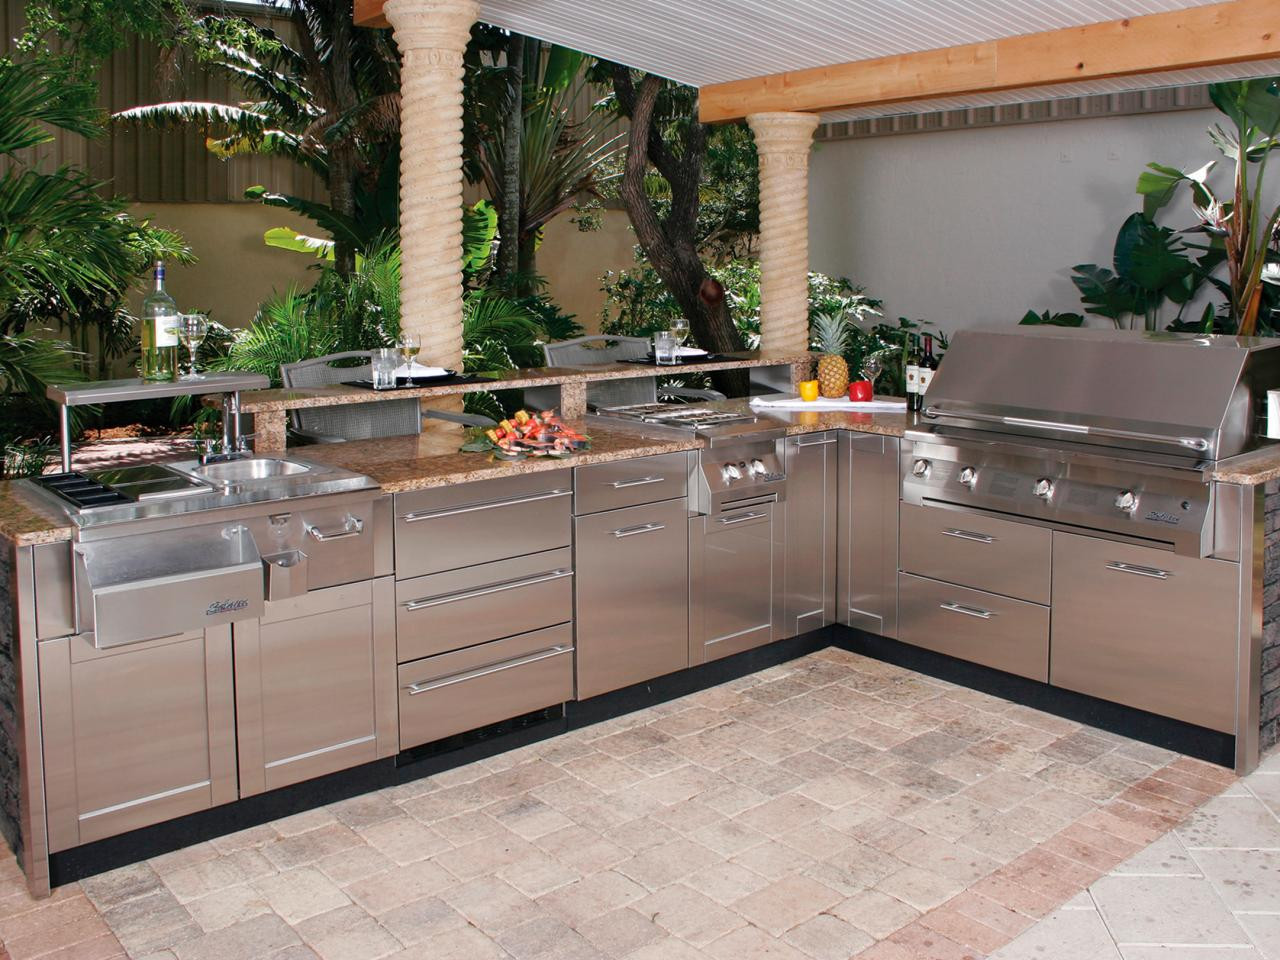 Prefabricated Outdoor Kitchen Kits Lovely 35 Ideas About Prefab Outdoor Kitchen Kits Theydesign Of Prefabricated Outdoor Kitchen Kits 